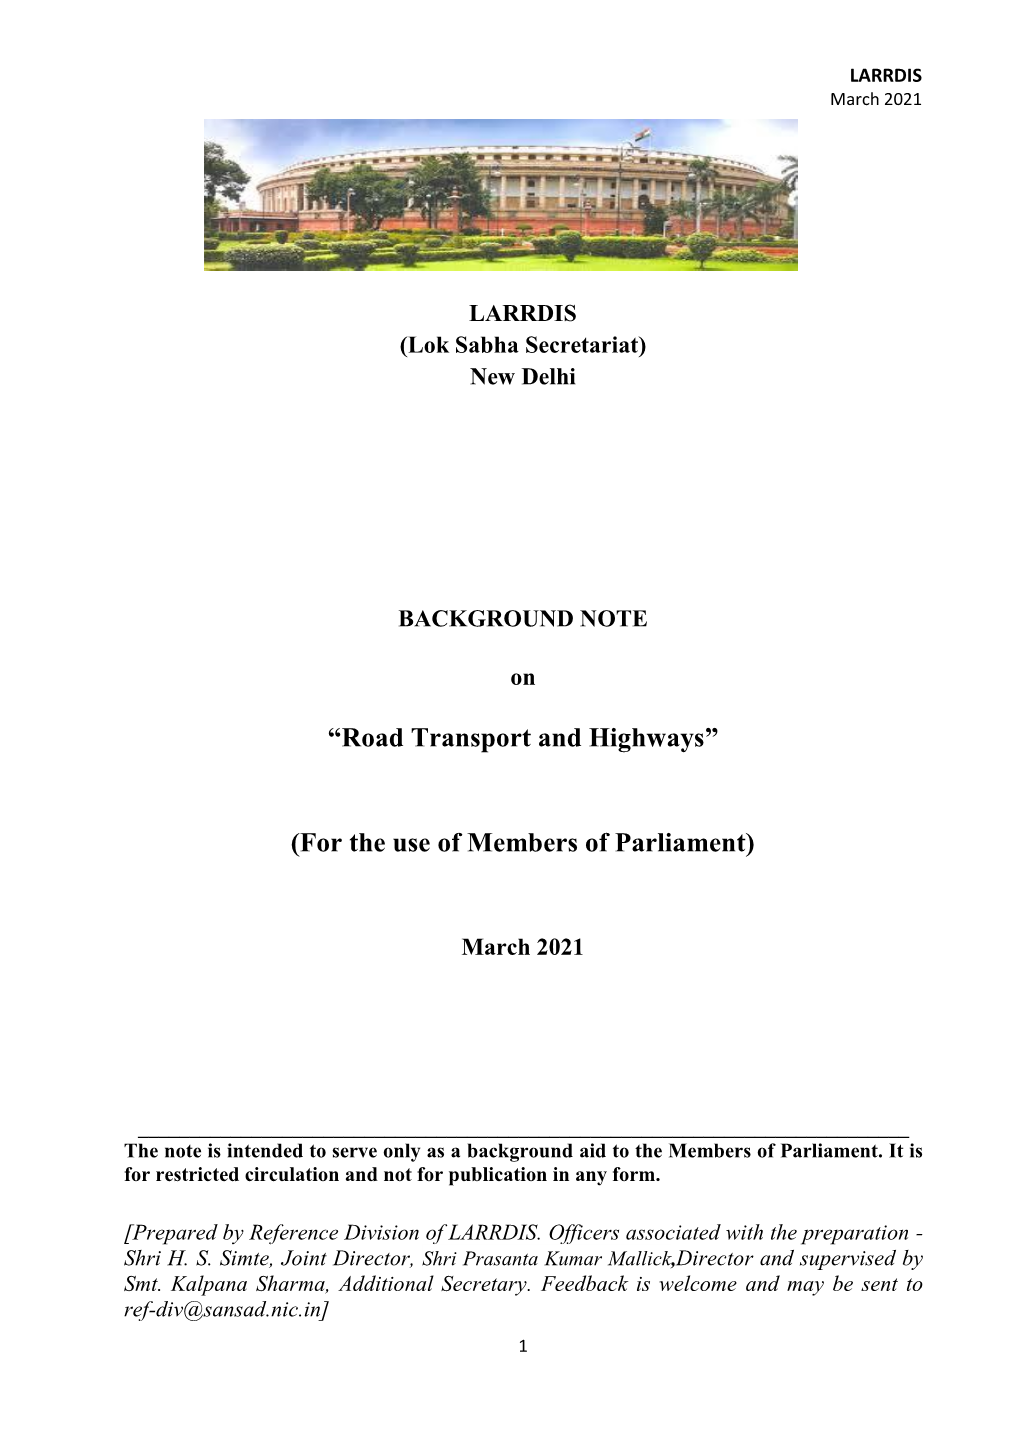 “Road Transport and Highways” (For the Use of Members of Parliament)